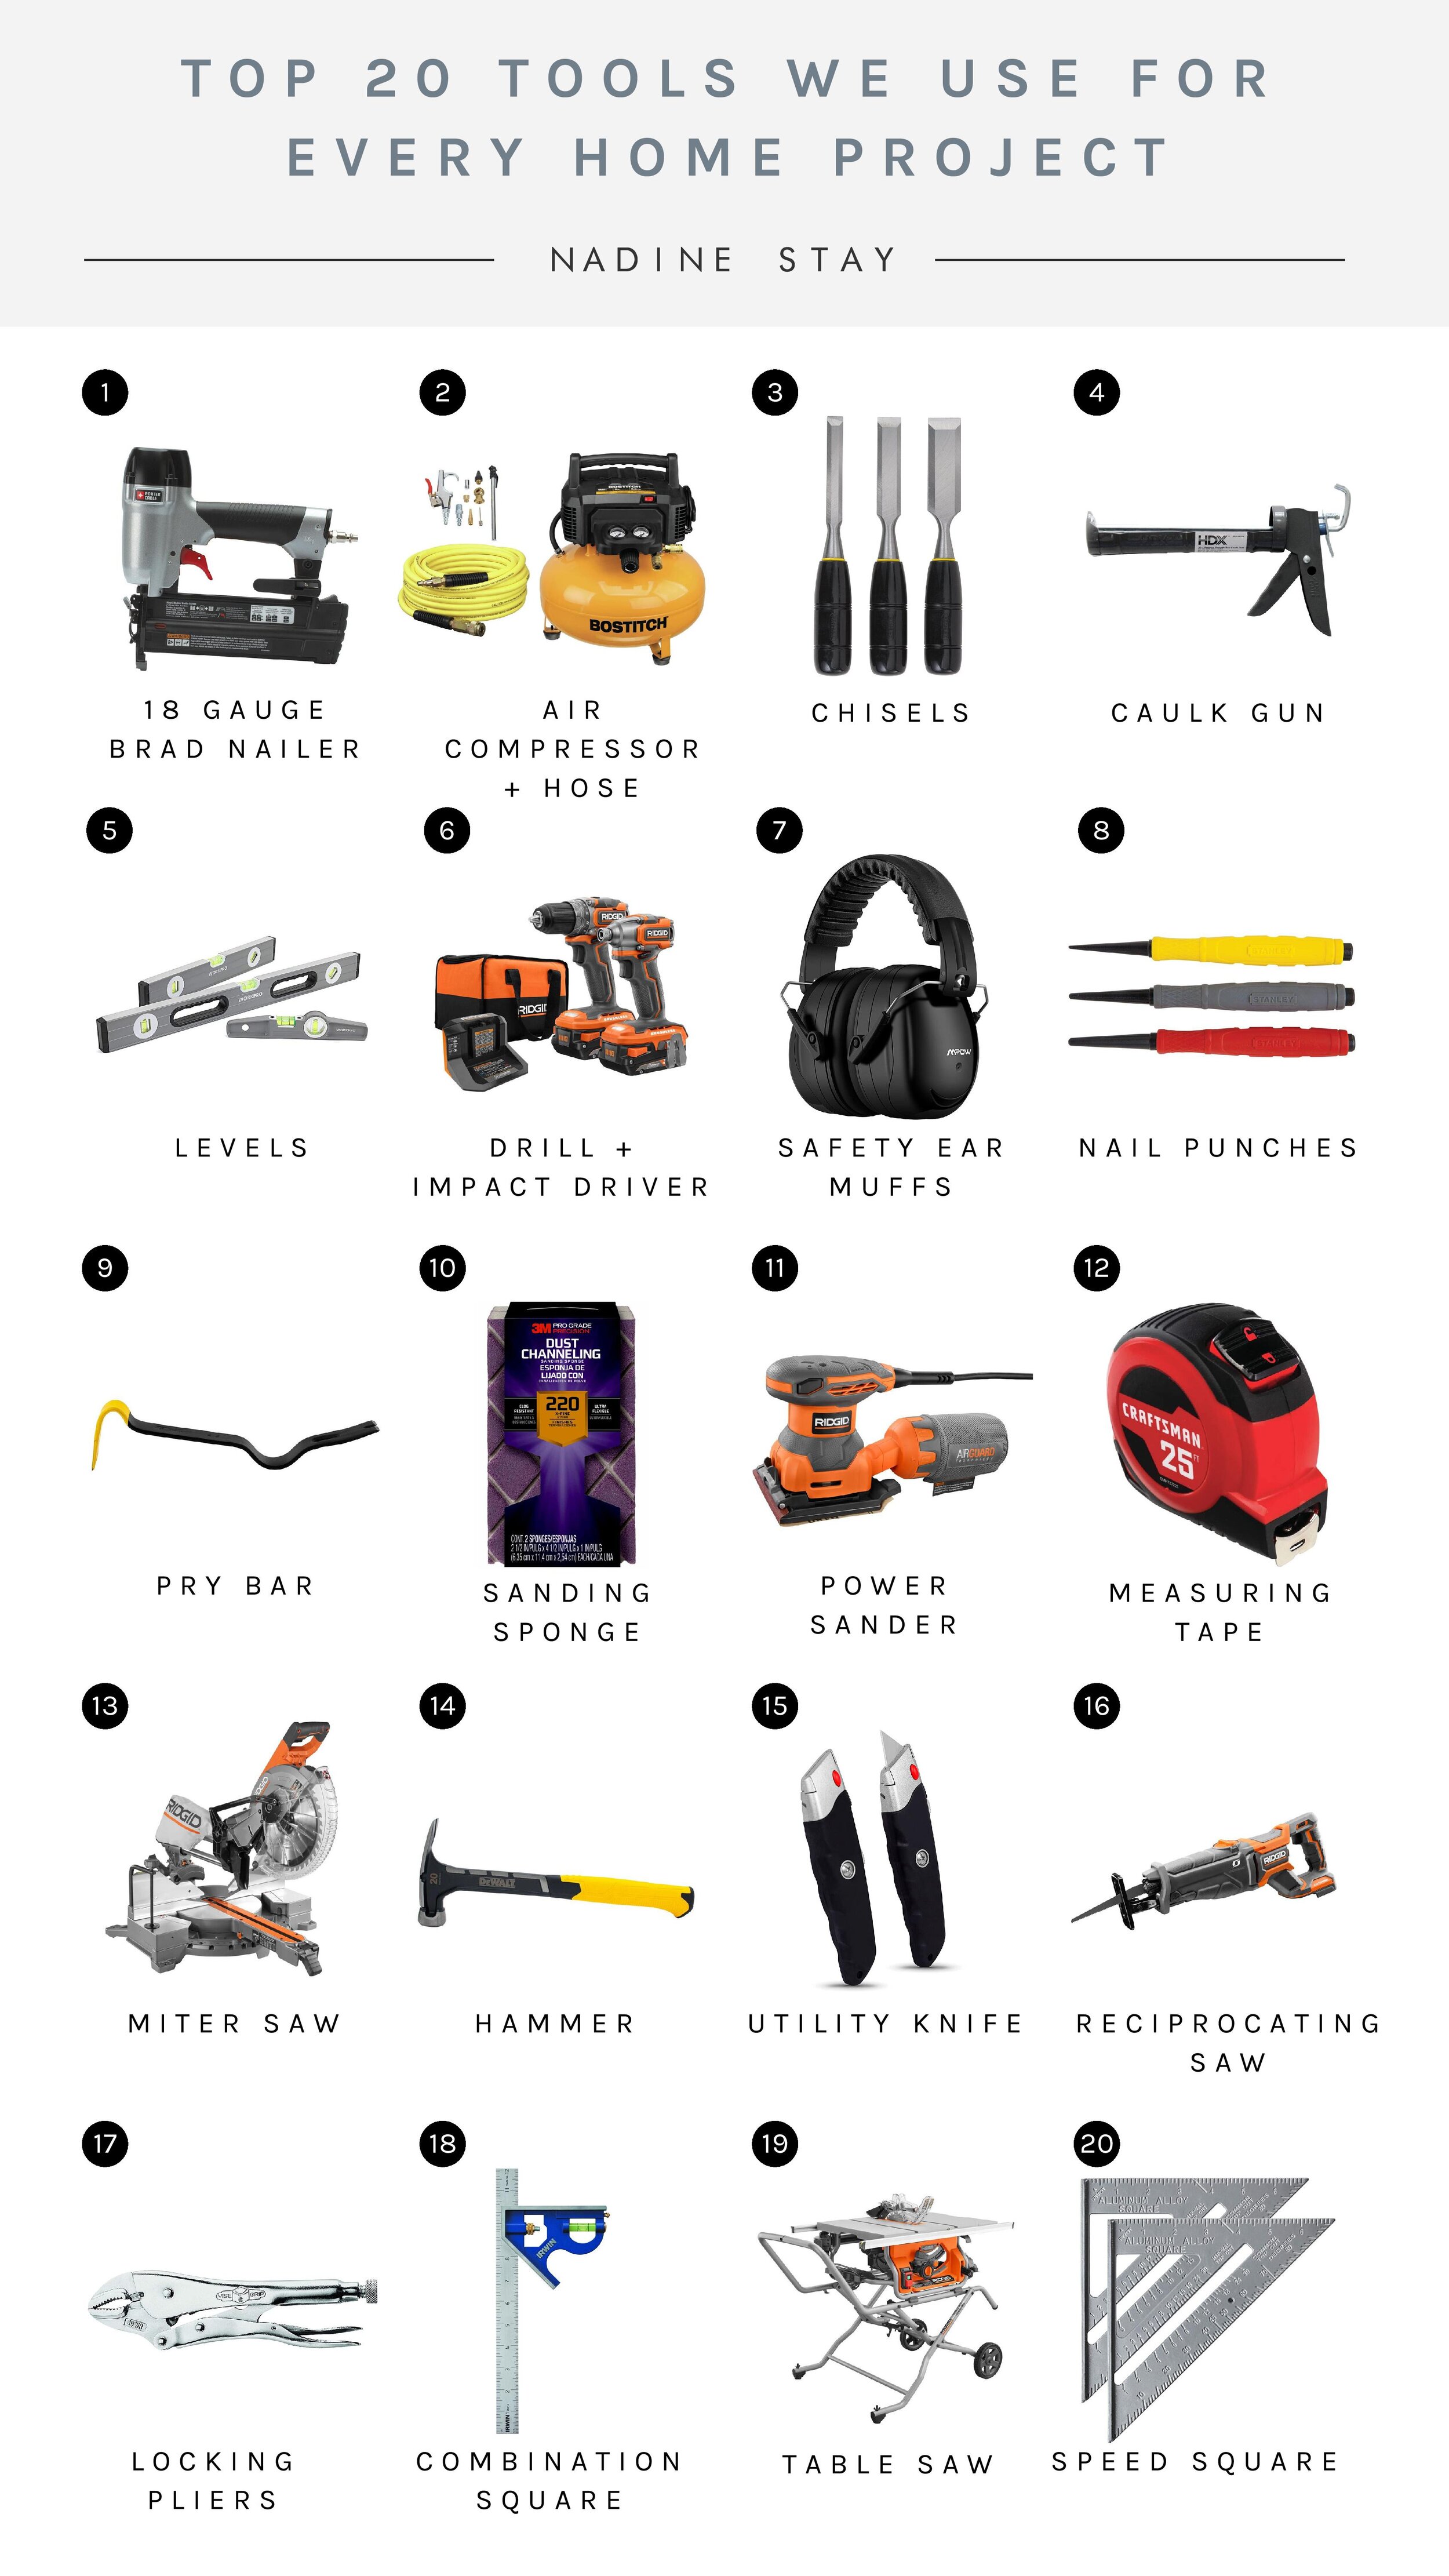 Top 20 Tools We Use for Every Home Renovation Project - Demo and construction tools you need to get you through a remodel or building project. | Nadine Stay